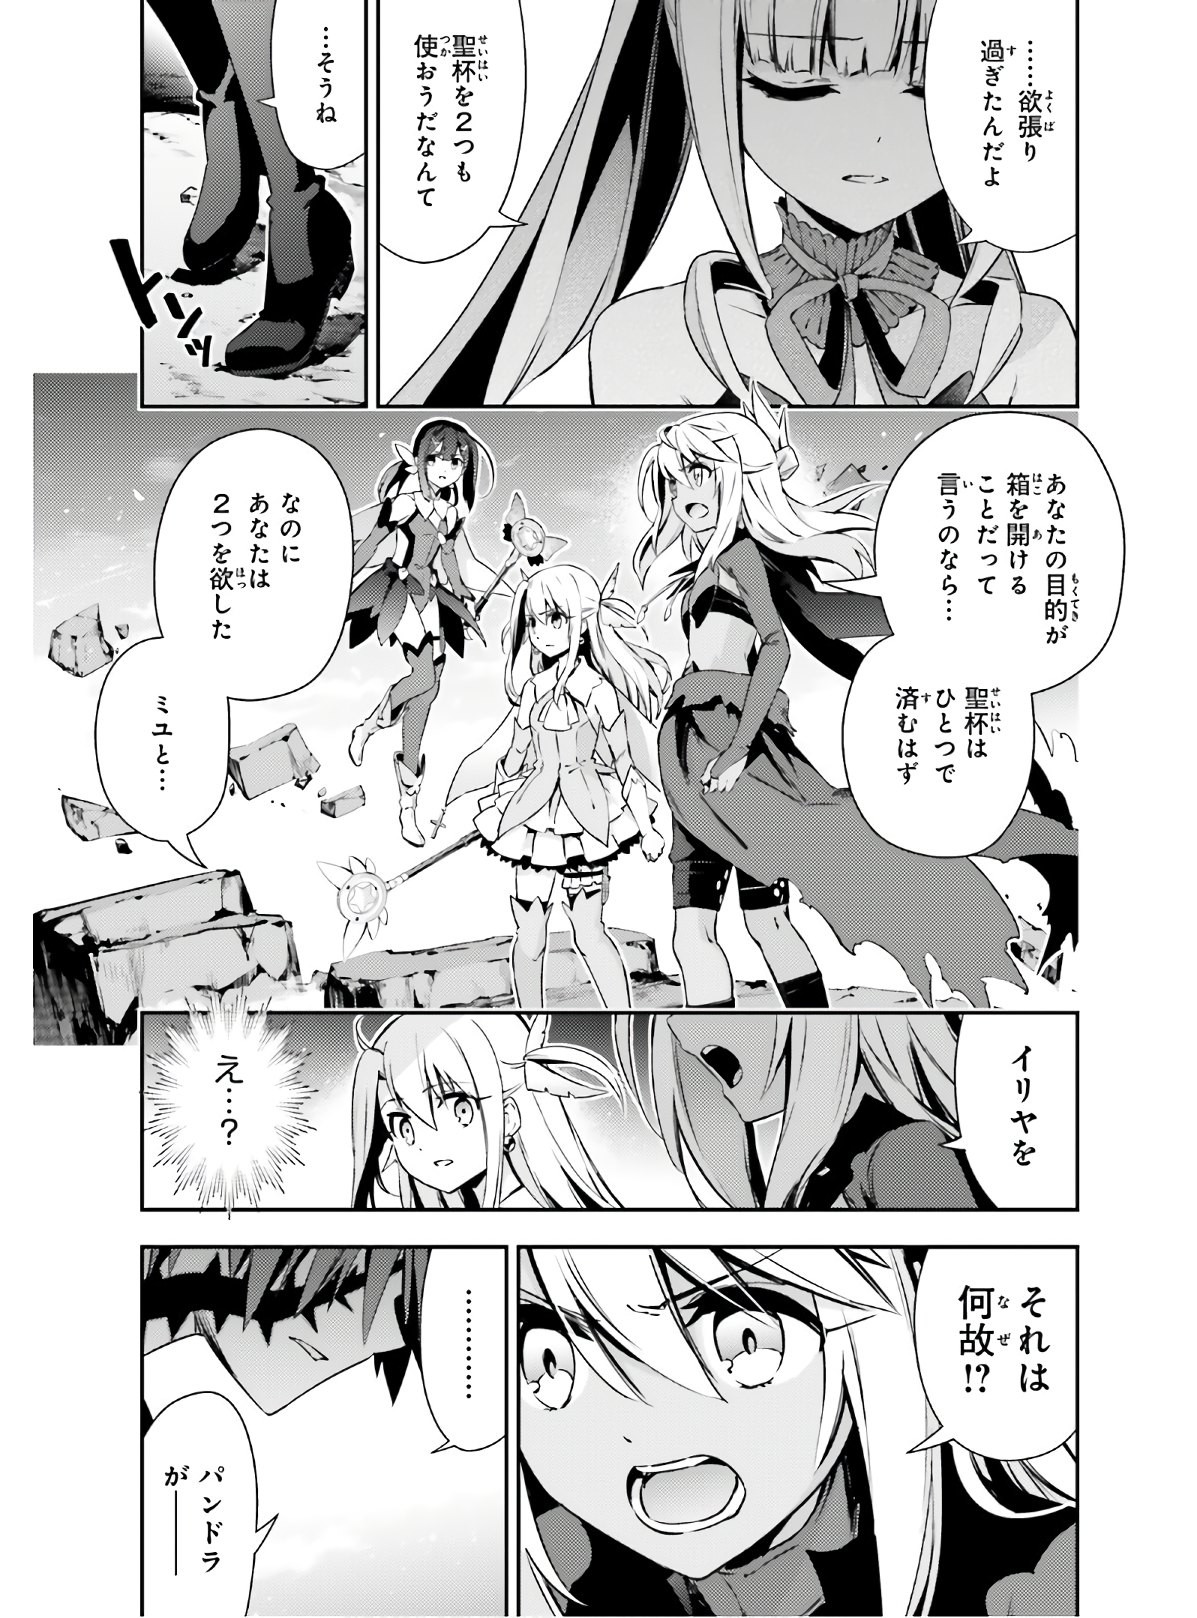 Fate/Kaleid Liner Prisma Illya Drei! - Chapter 57-2 - Page 3